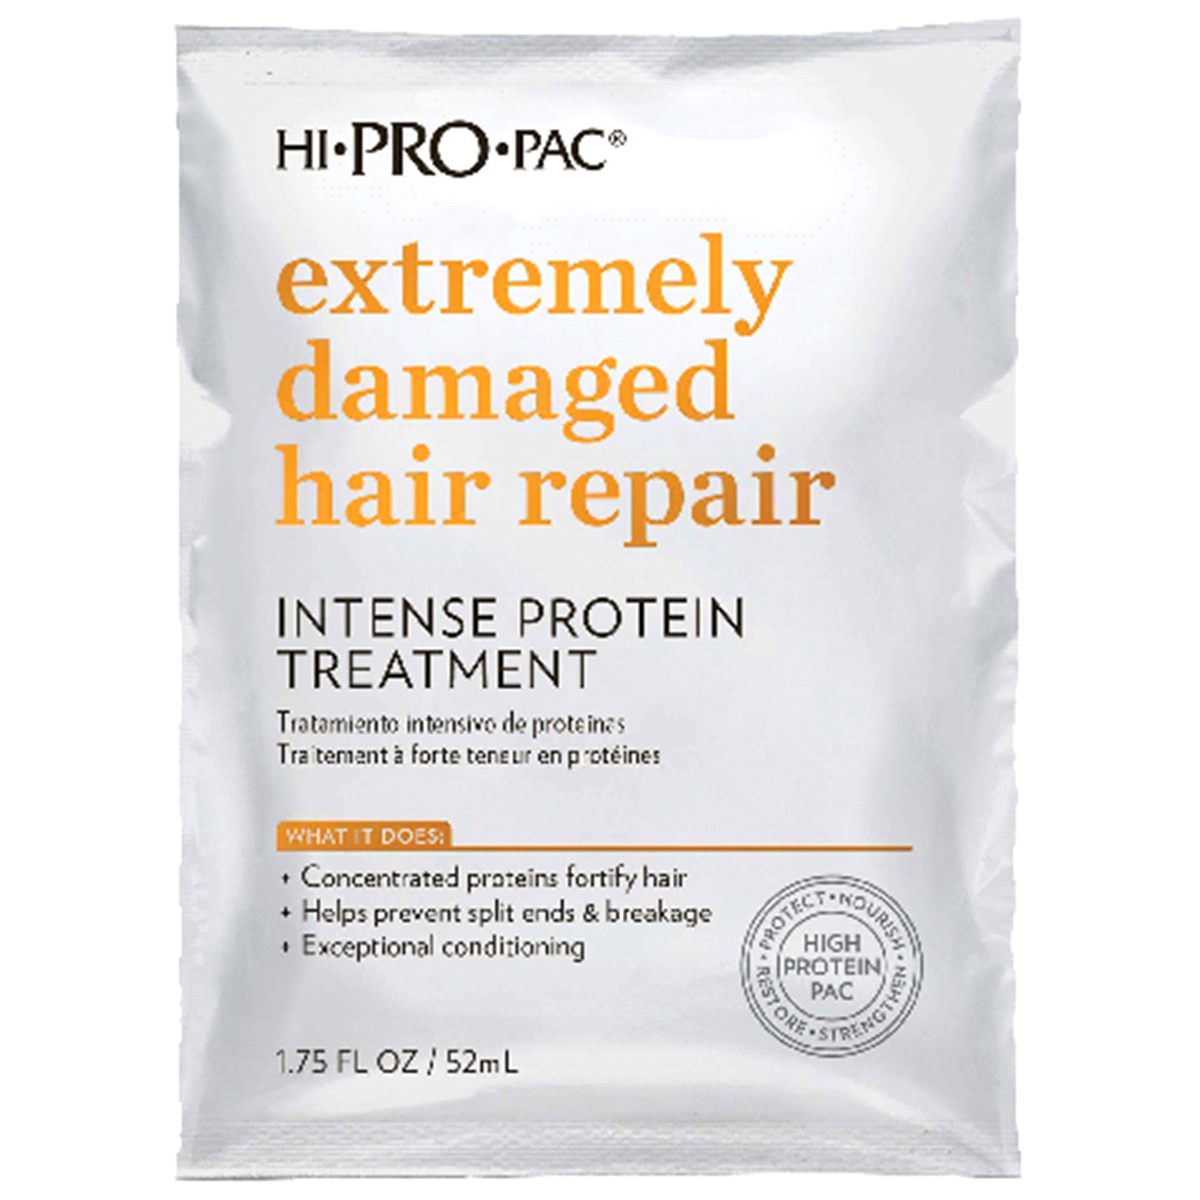 slide 1 of 1, Hi-Pro-Pac Extremely Damaged Hair Intense Protein Treatment, 1.75 oz